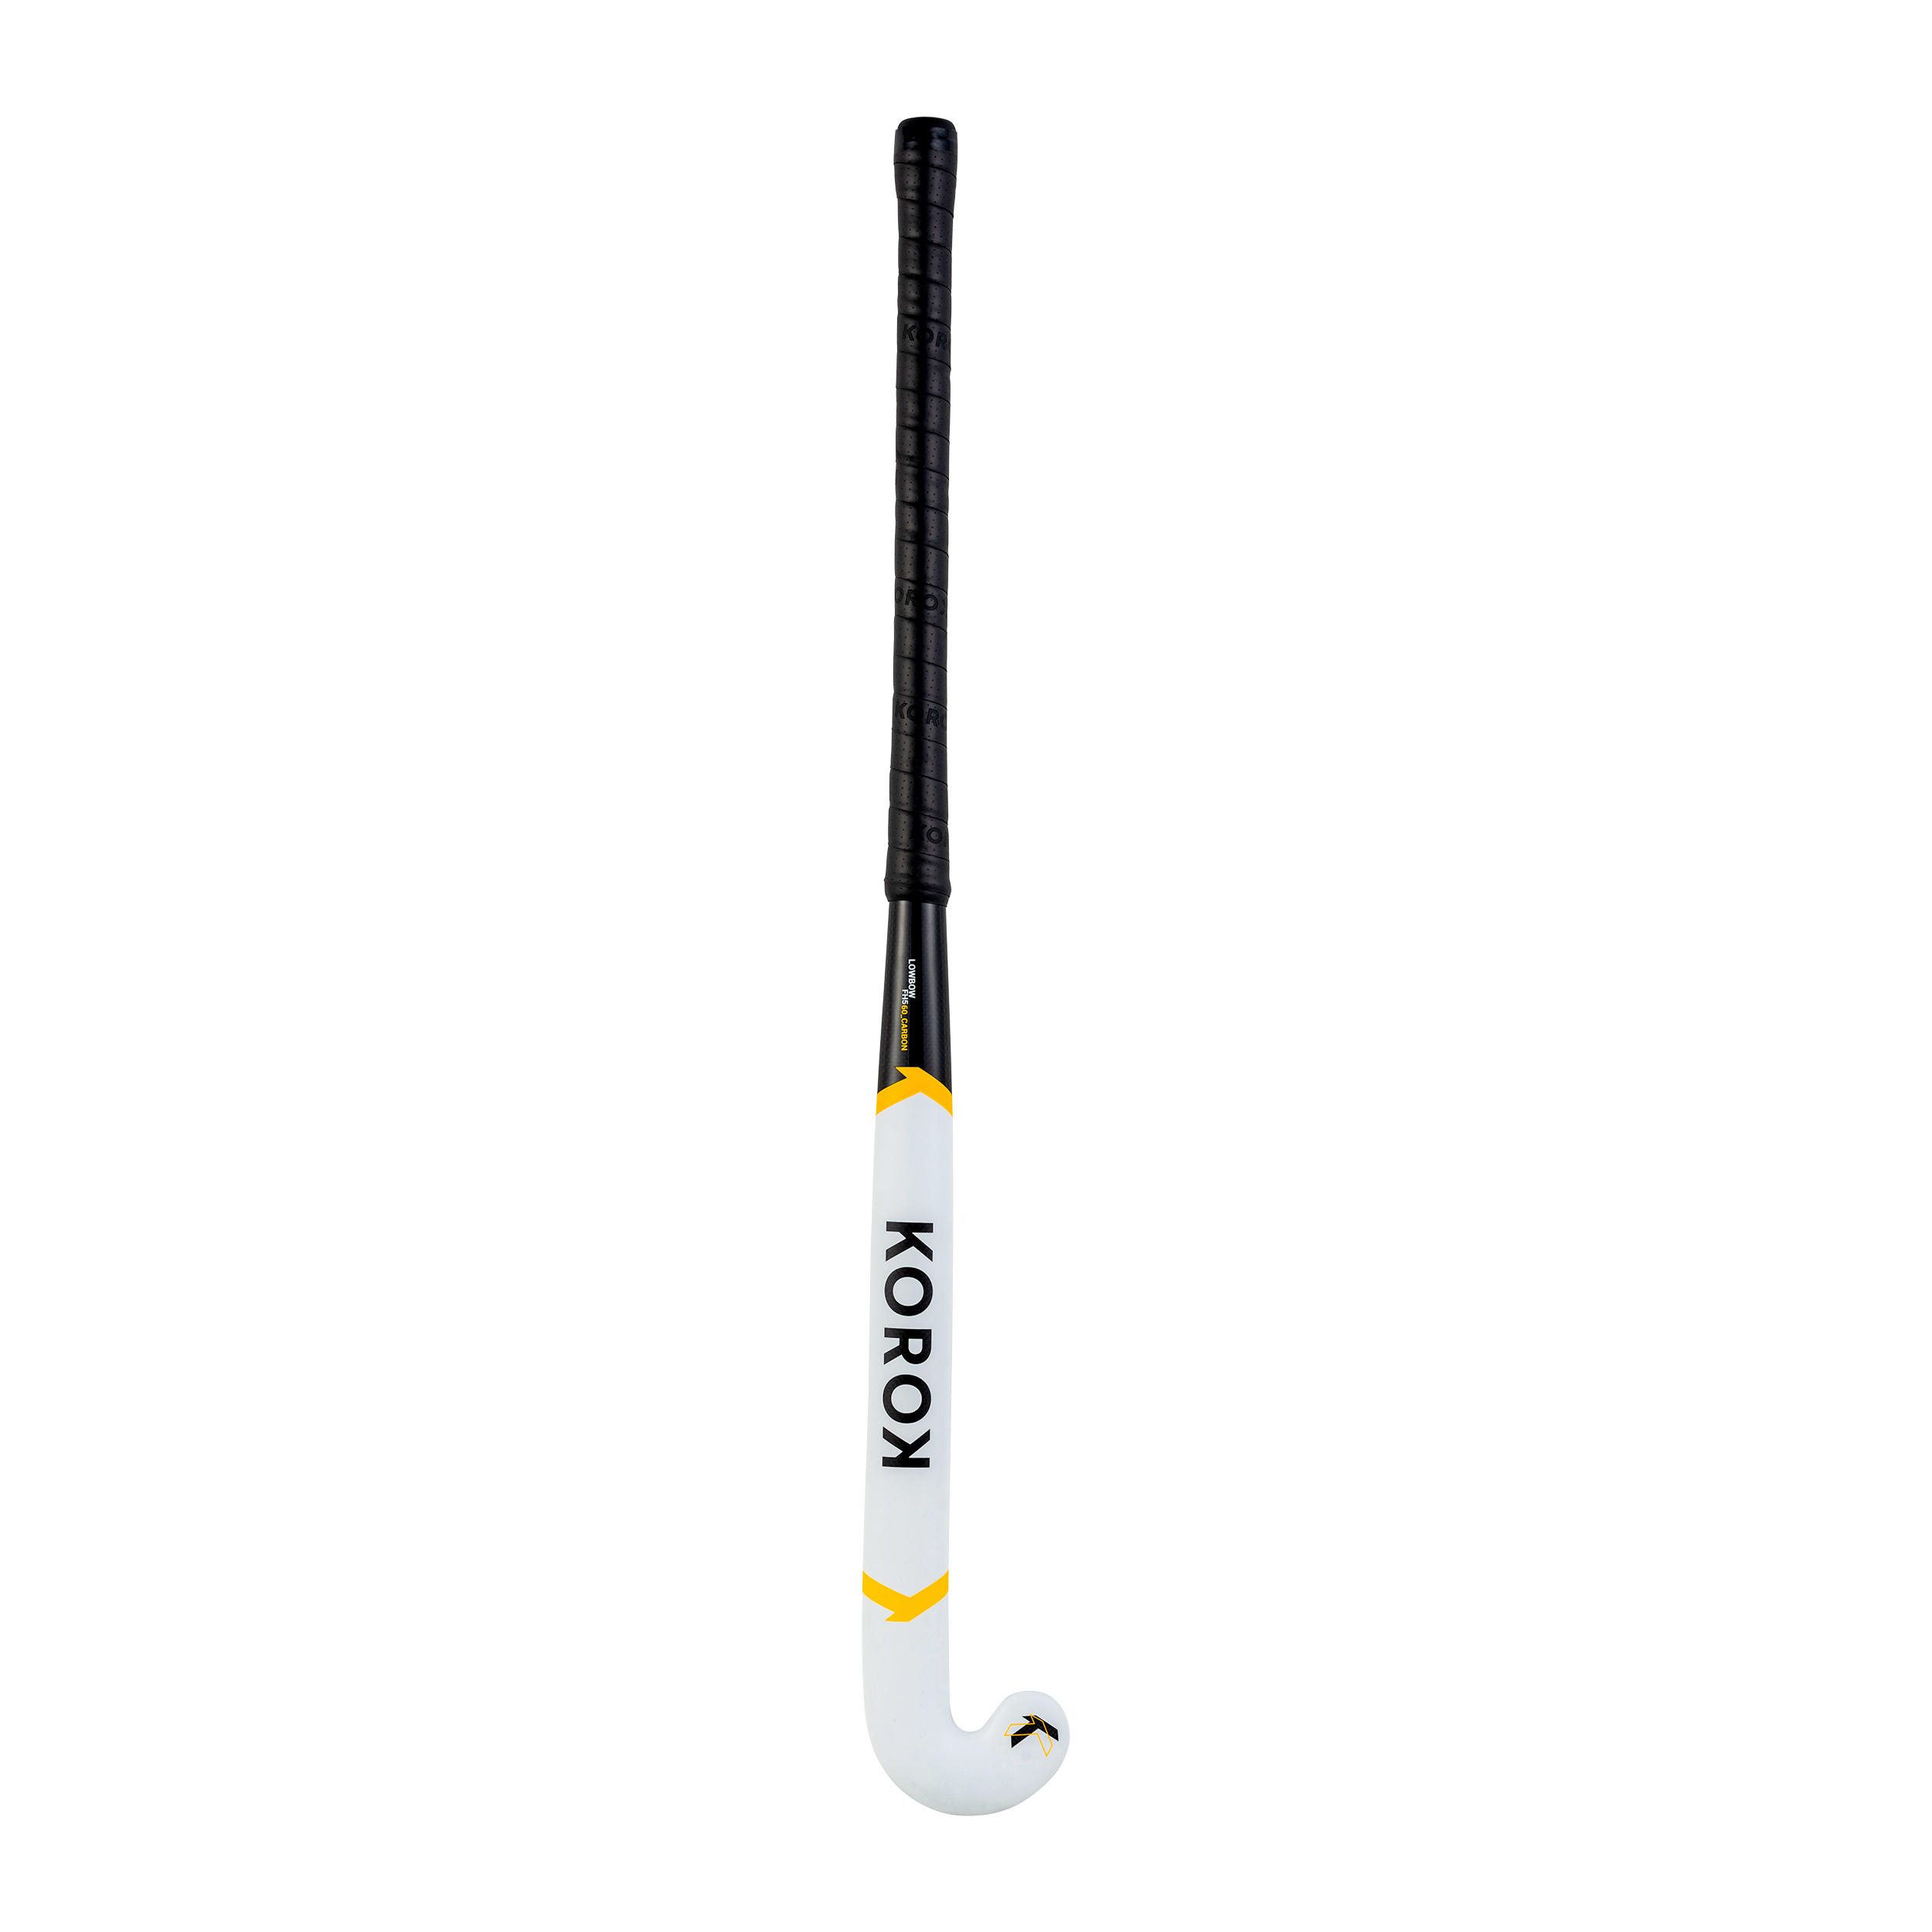 Adult Intermediate 60% Carbon Low Bow Field Hockey Stick FH560 - White/Yellow 7/12